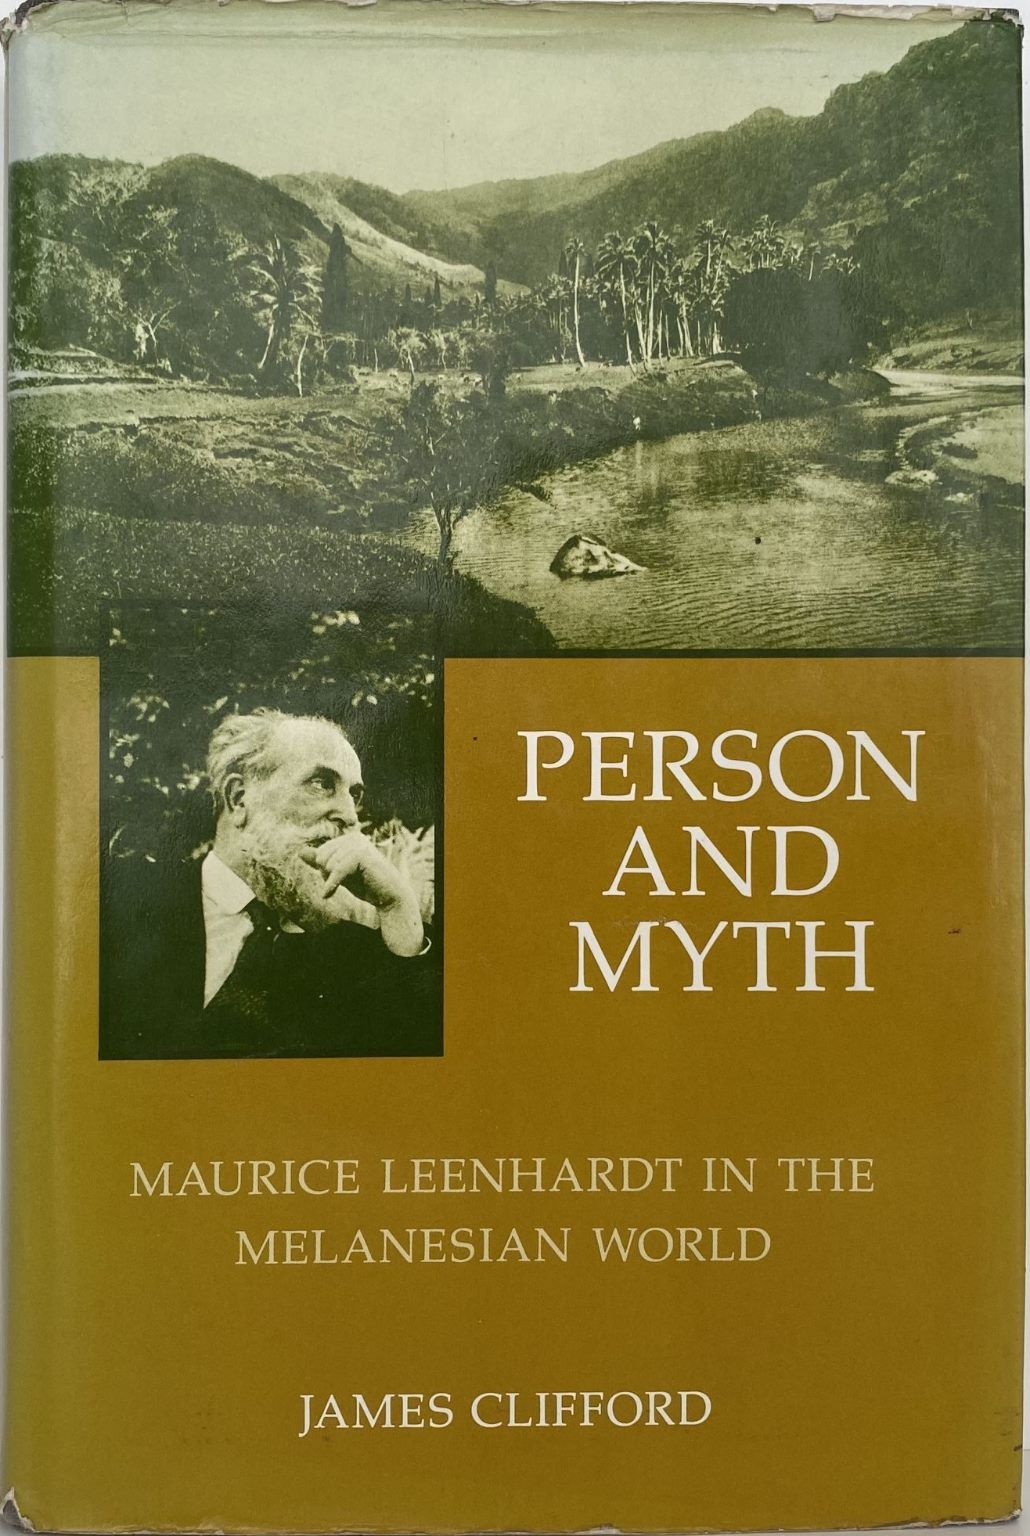 PERSON AND MYTH: Maurice Leenhardt in the Melanesian World